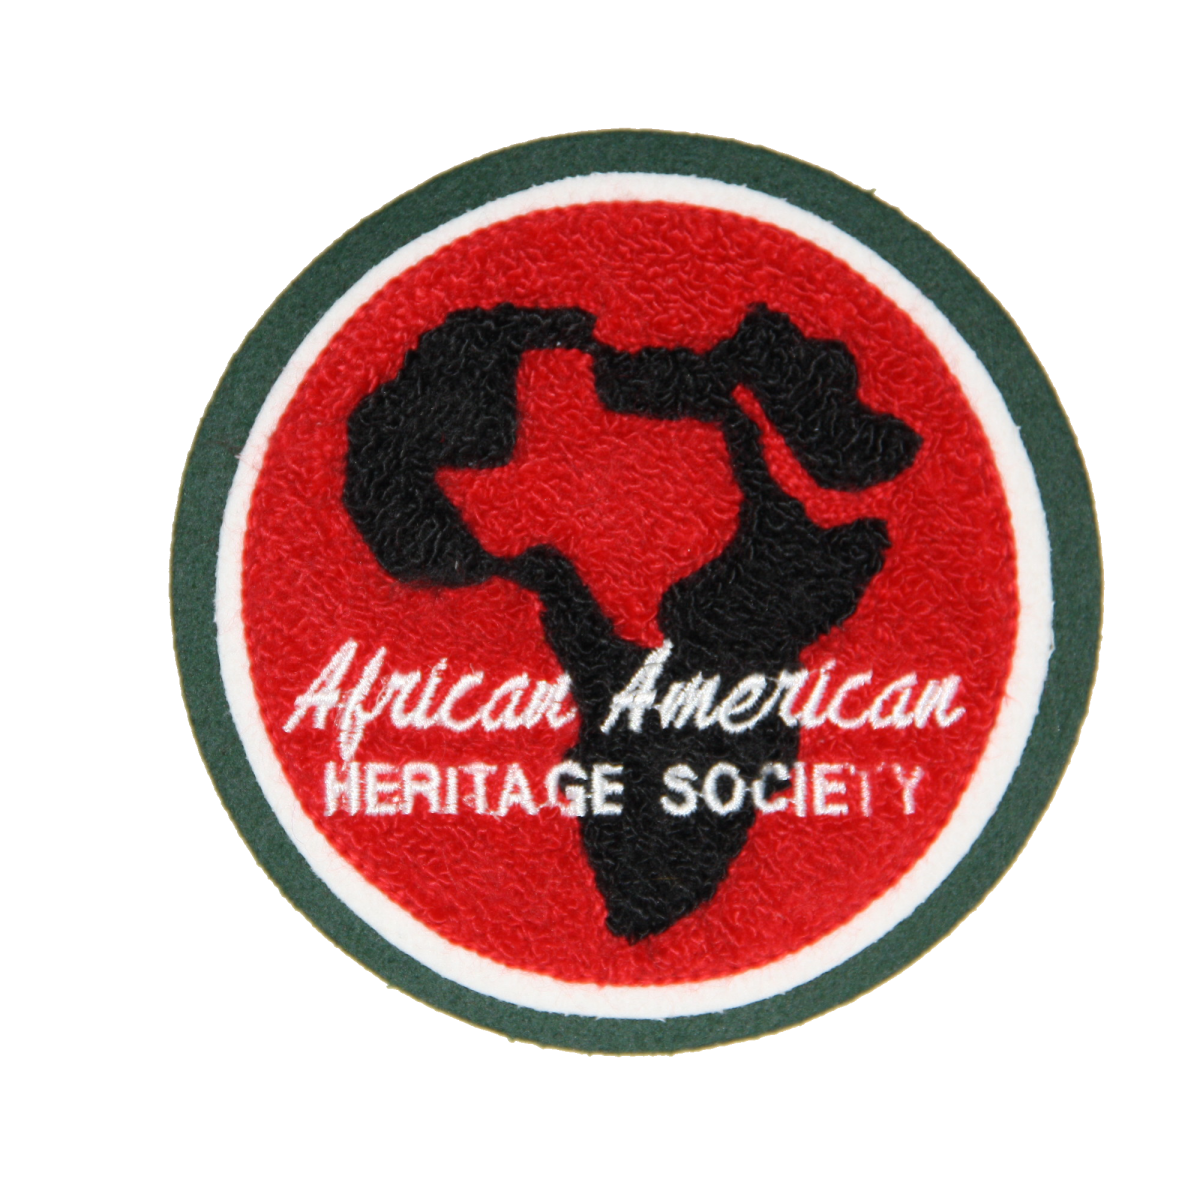 African American Heritage Society